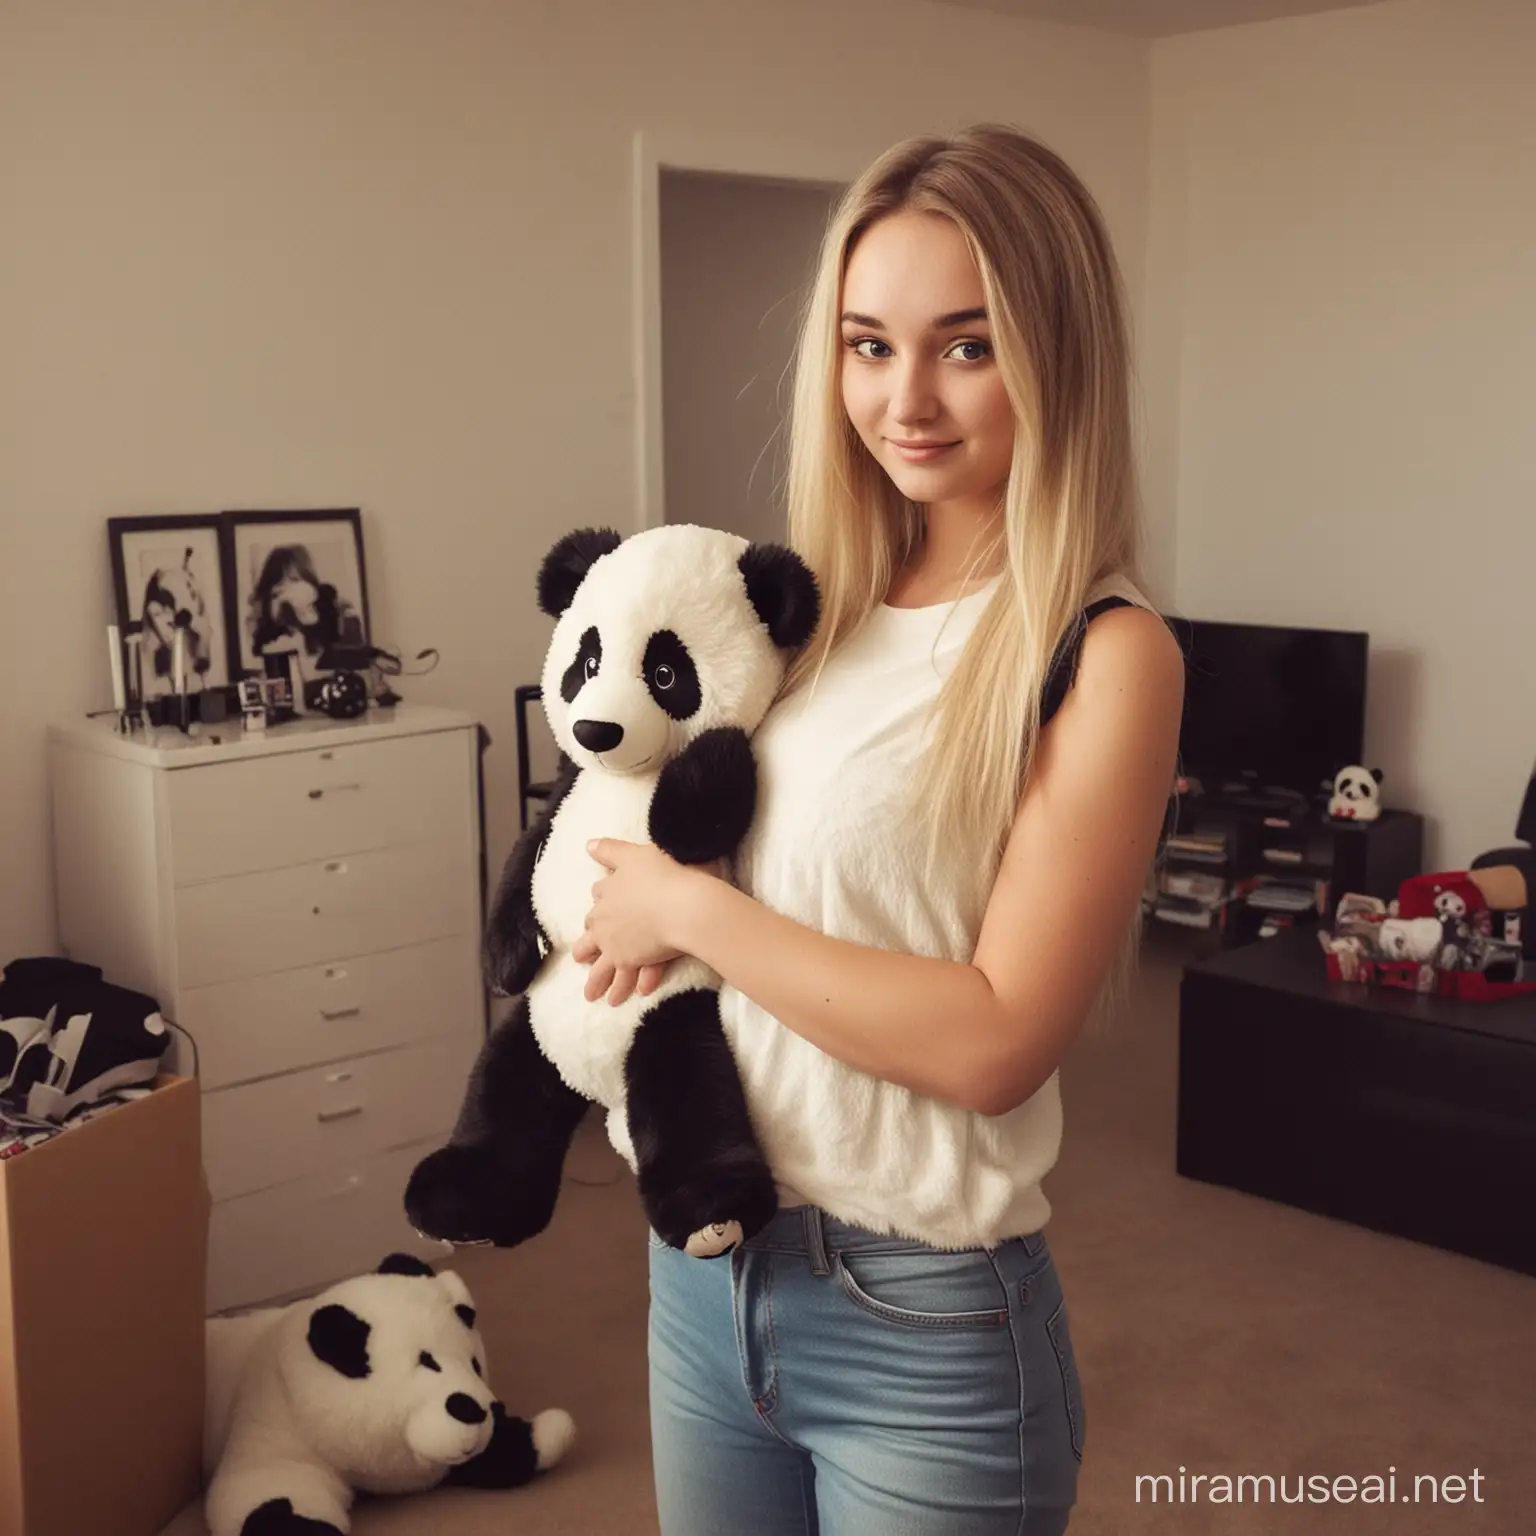 A blonde 20 year old woman in an apartment, there is a massive stuffed panda bear in the apartment, the woman is holding a bomb